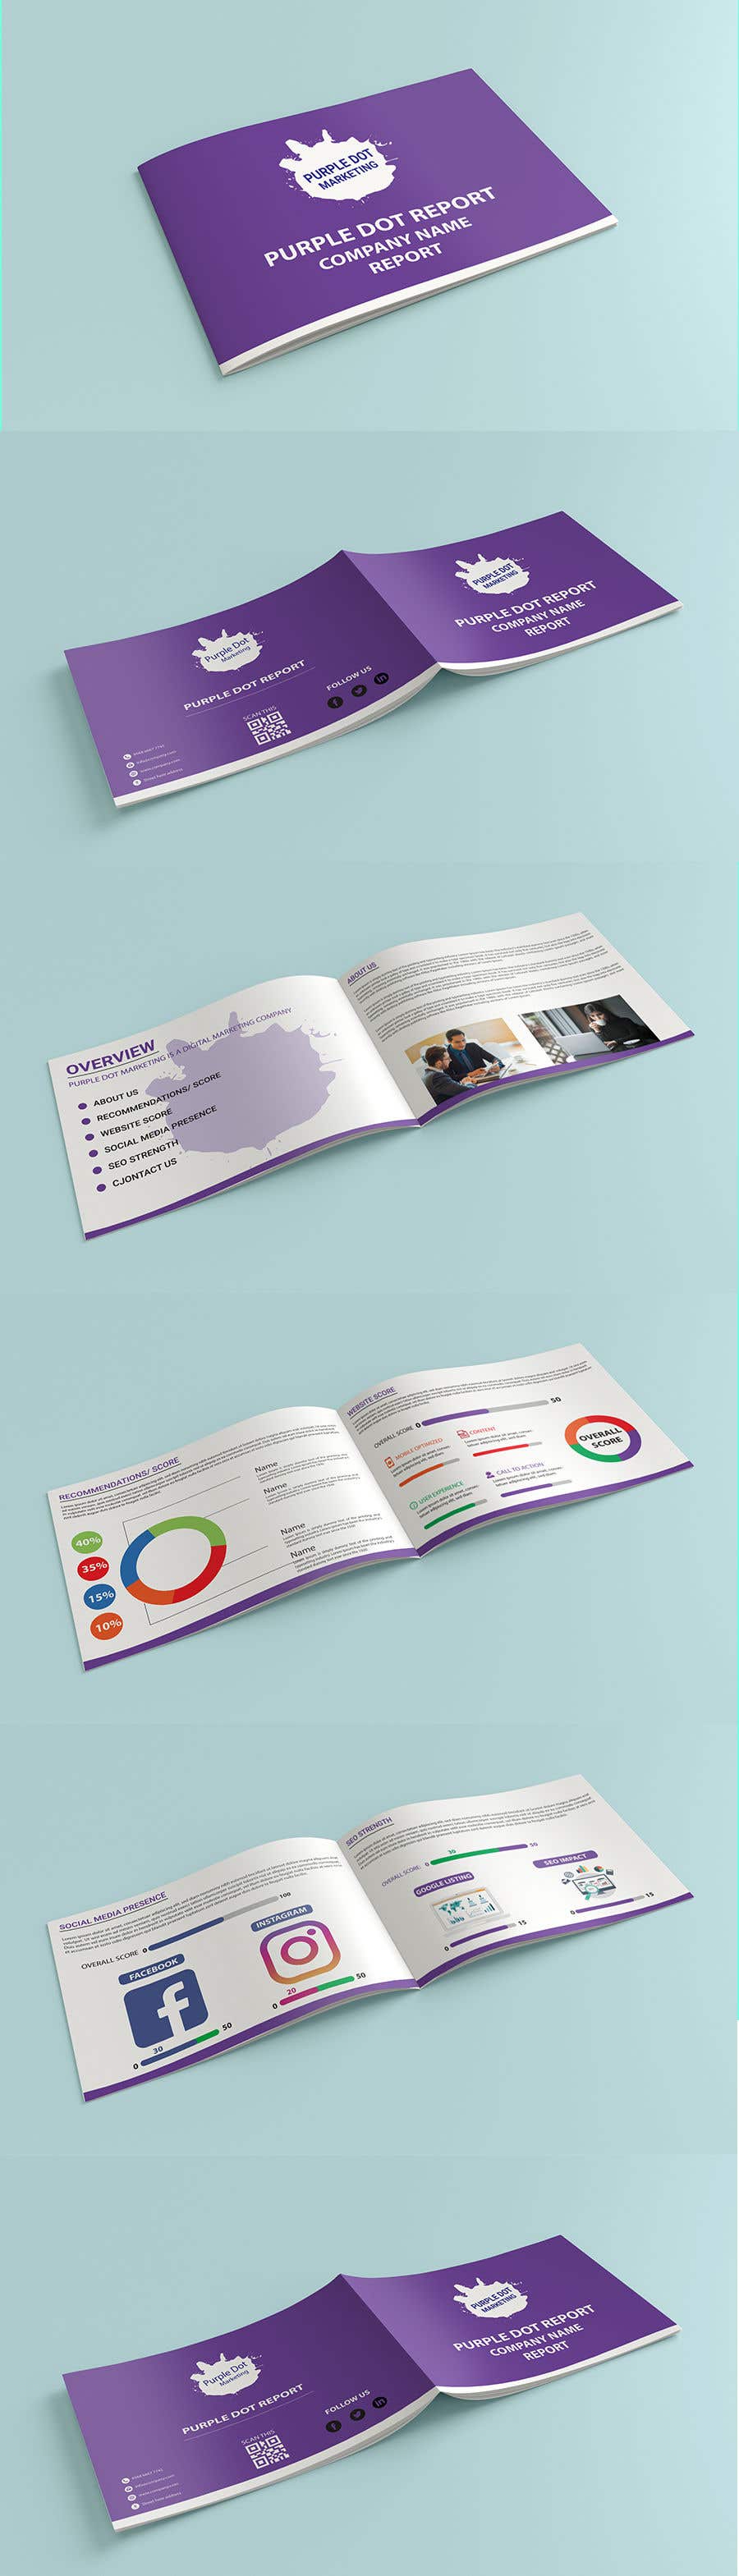 Contest Entry #16 for                                                 Design a Brochure- "Purple Dot Report"
                                            